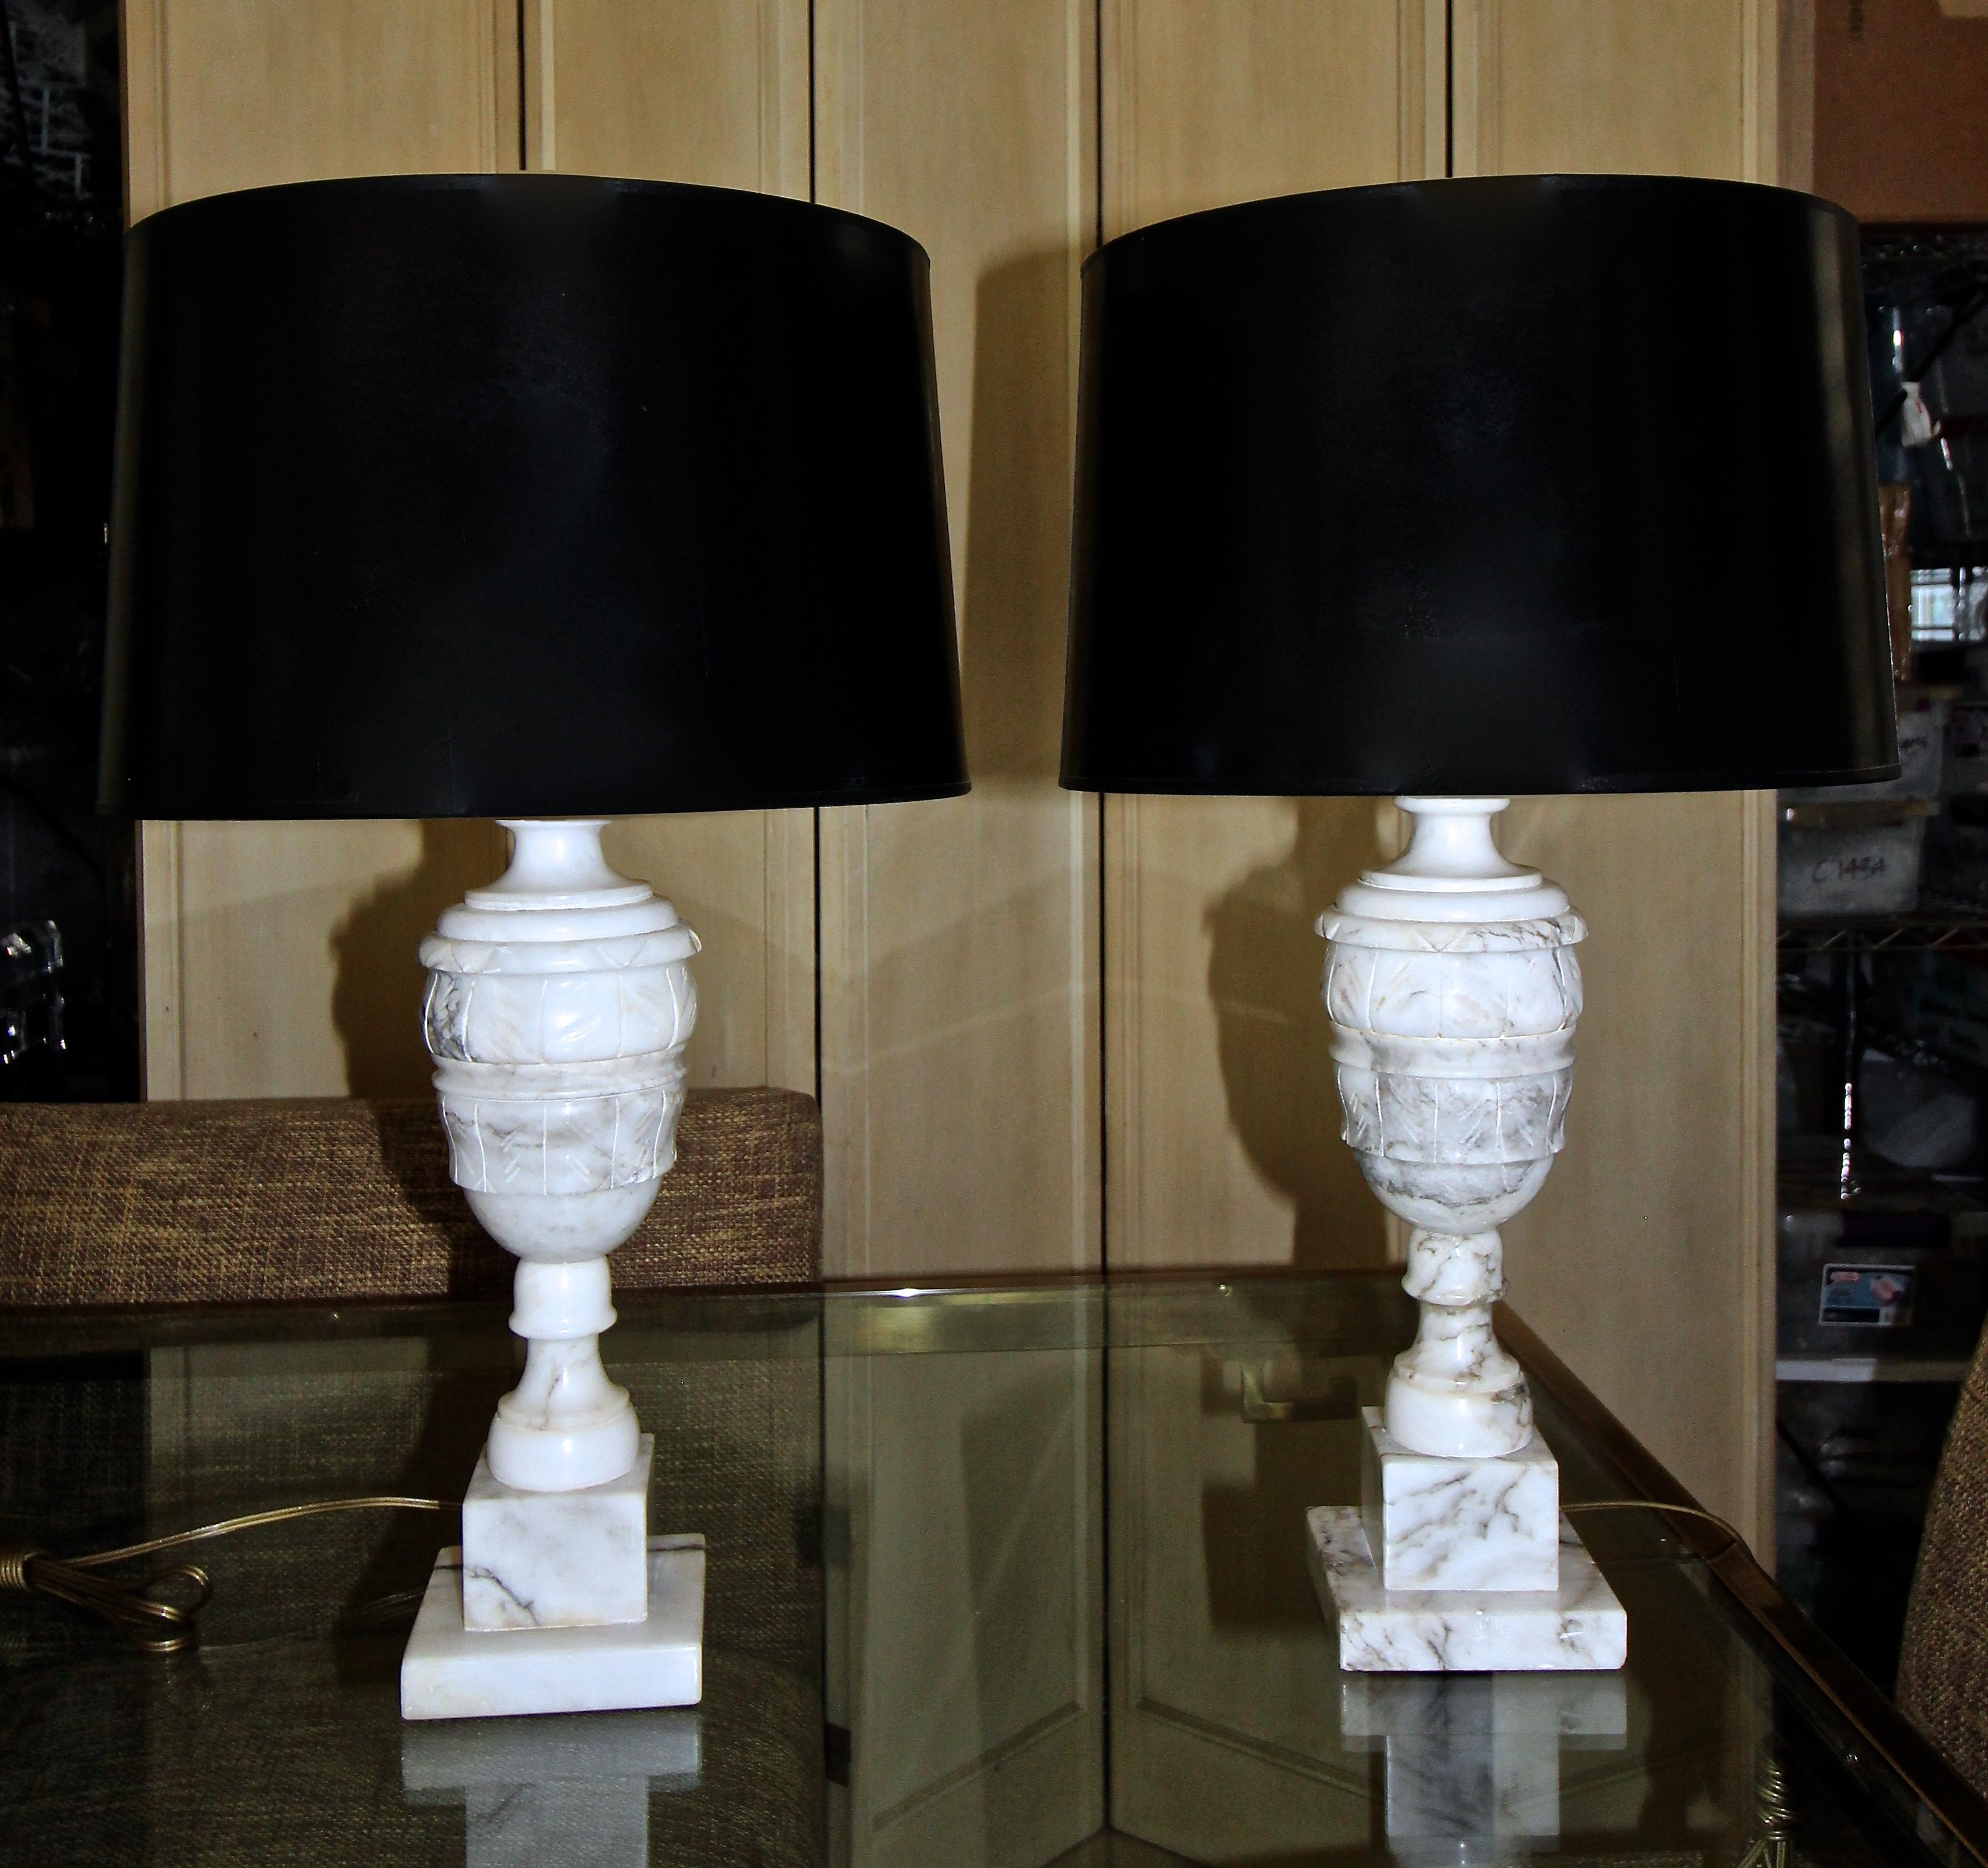 Pair of Italian neoclassic style alabaster table lamps with brass fittings. Newly rewired with 3 way socket and gold cord. Includes original alabaster matching harp finials. Shades not included for photography purposes only.